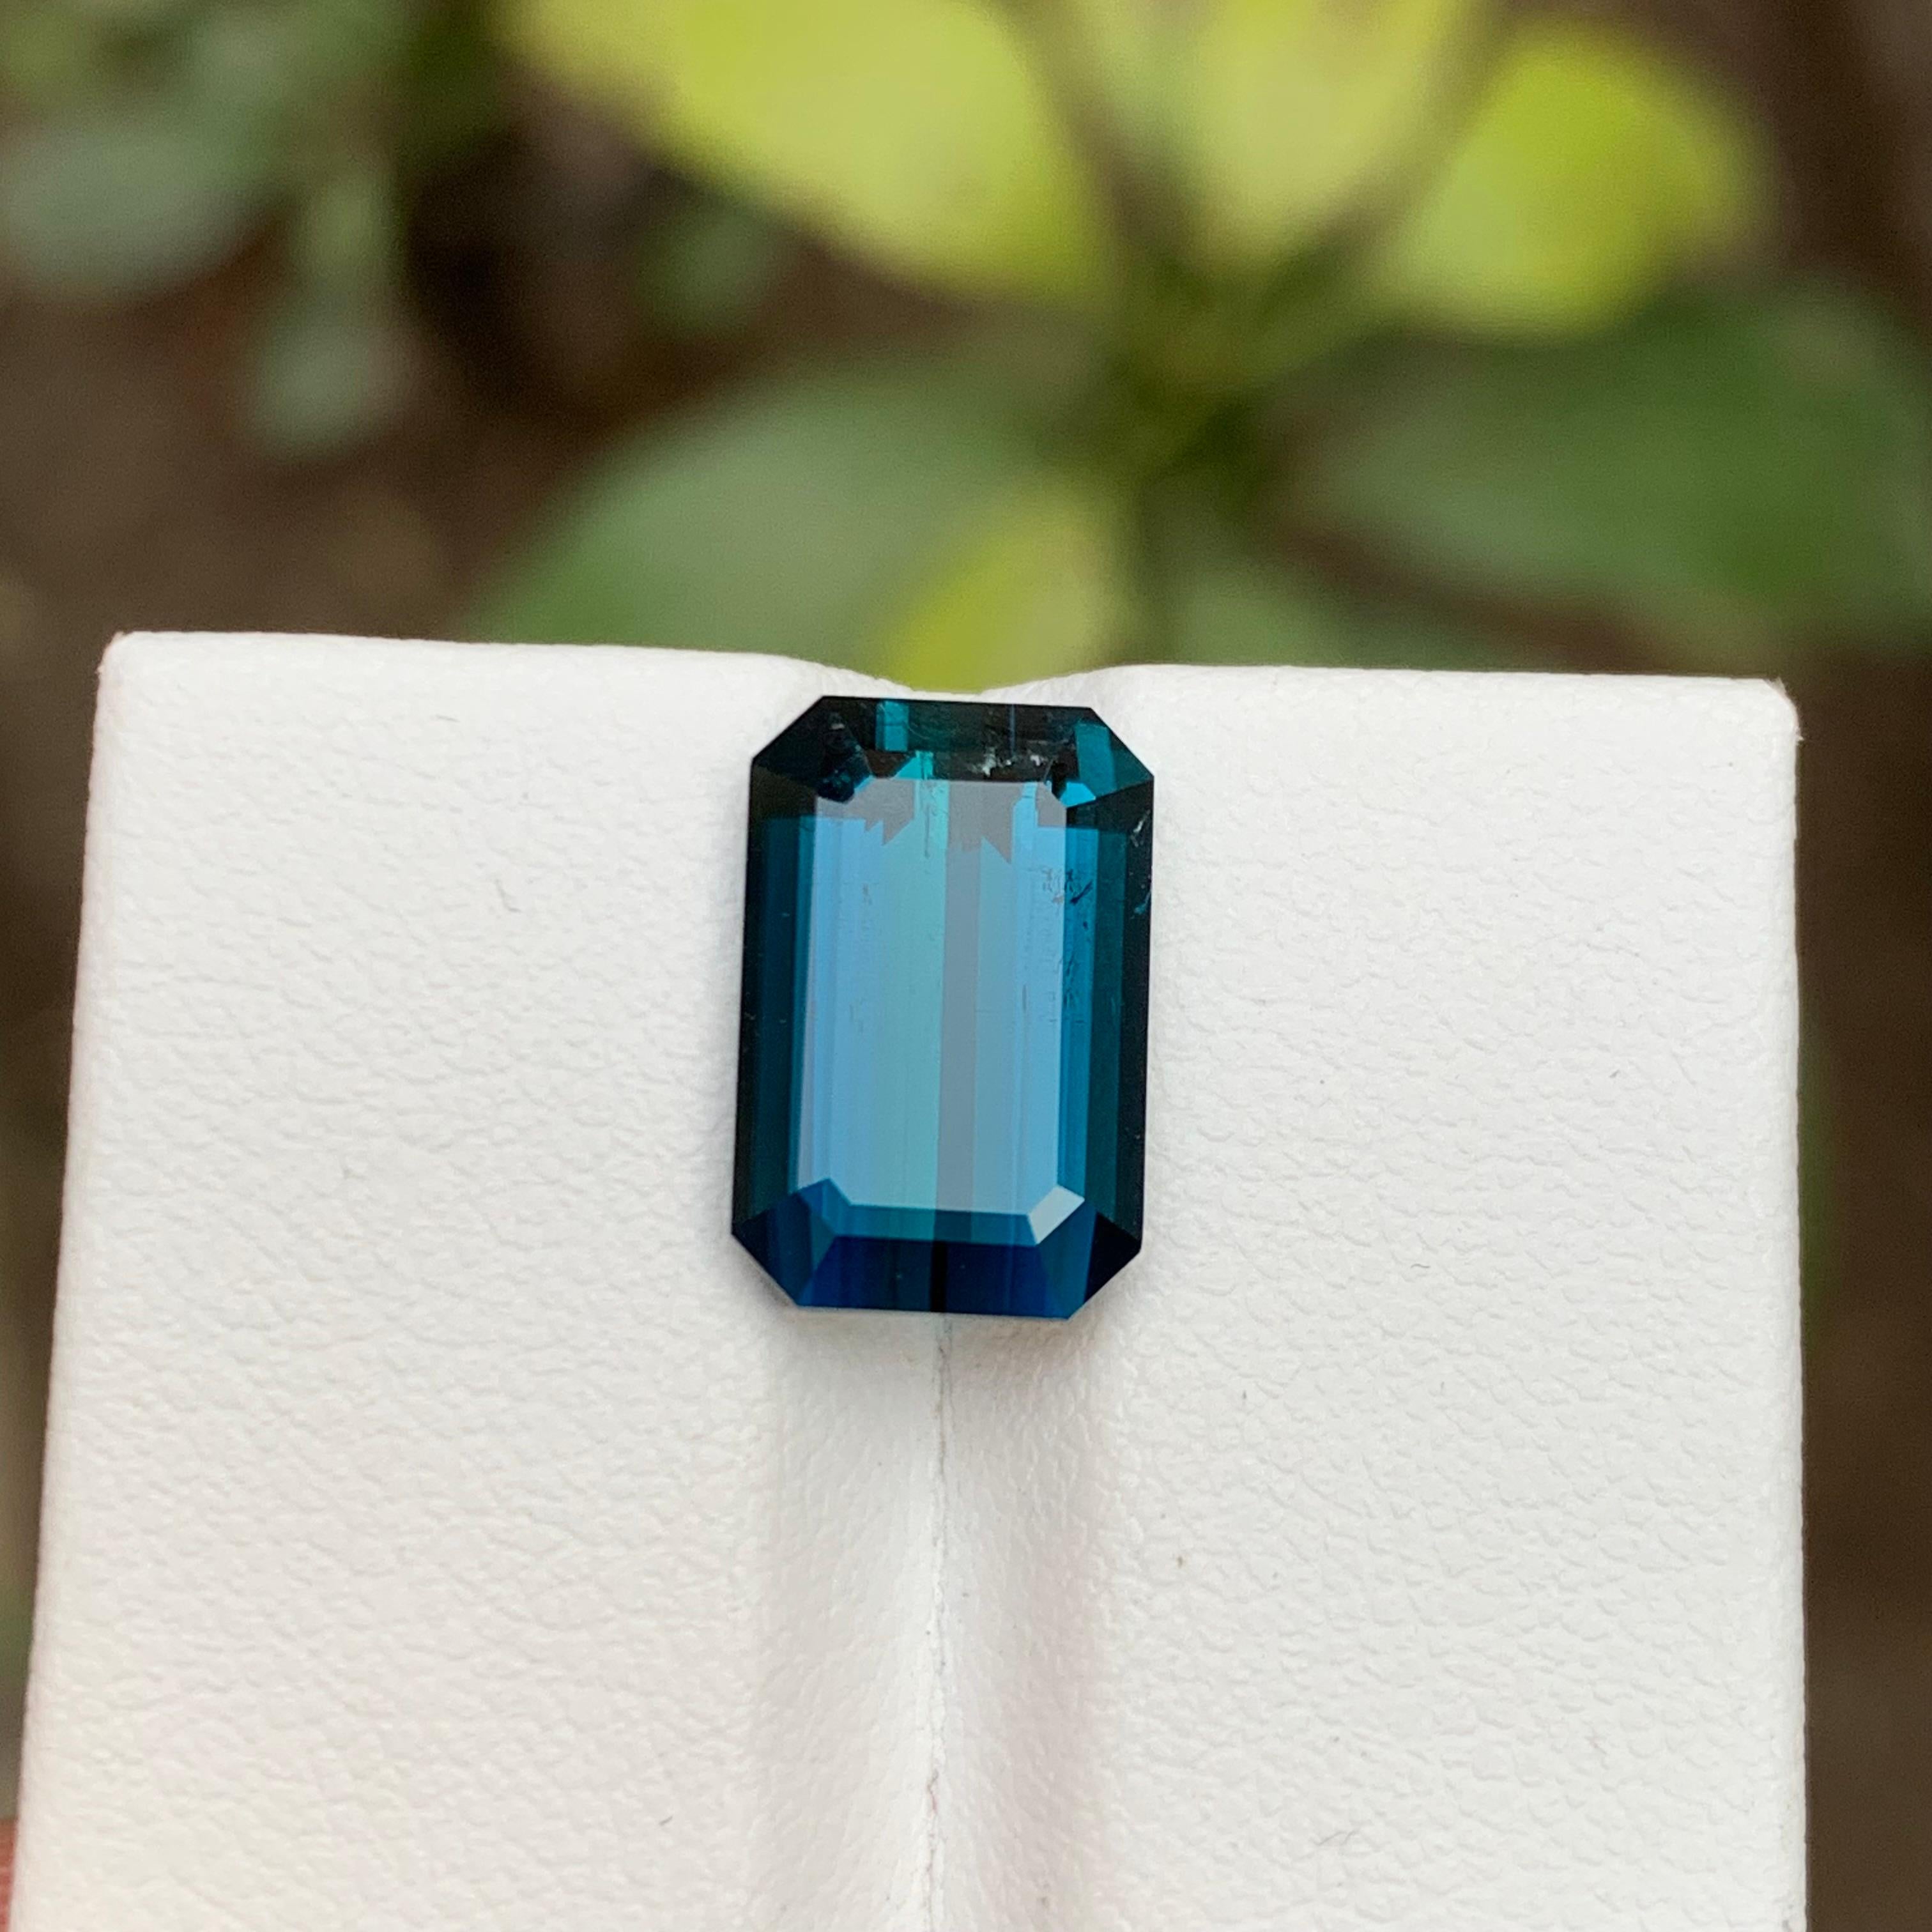 Rare Deep Inky Blue Natural Tourmaline Gemstone, 6.15 Ct Emerald Cut for Ring Af 1